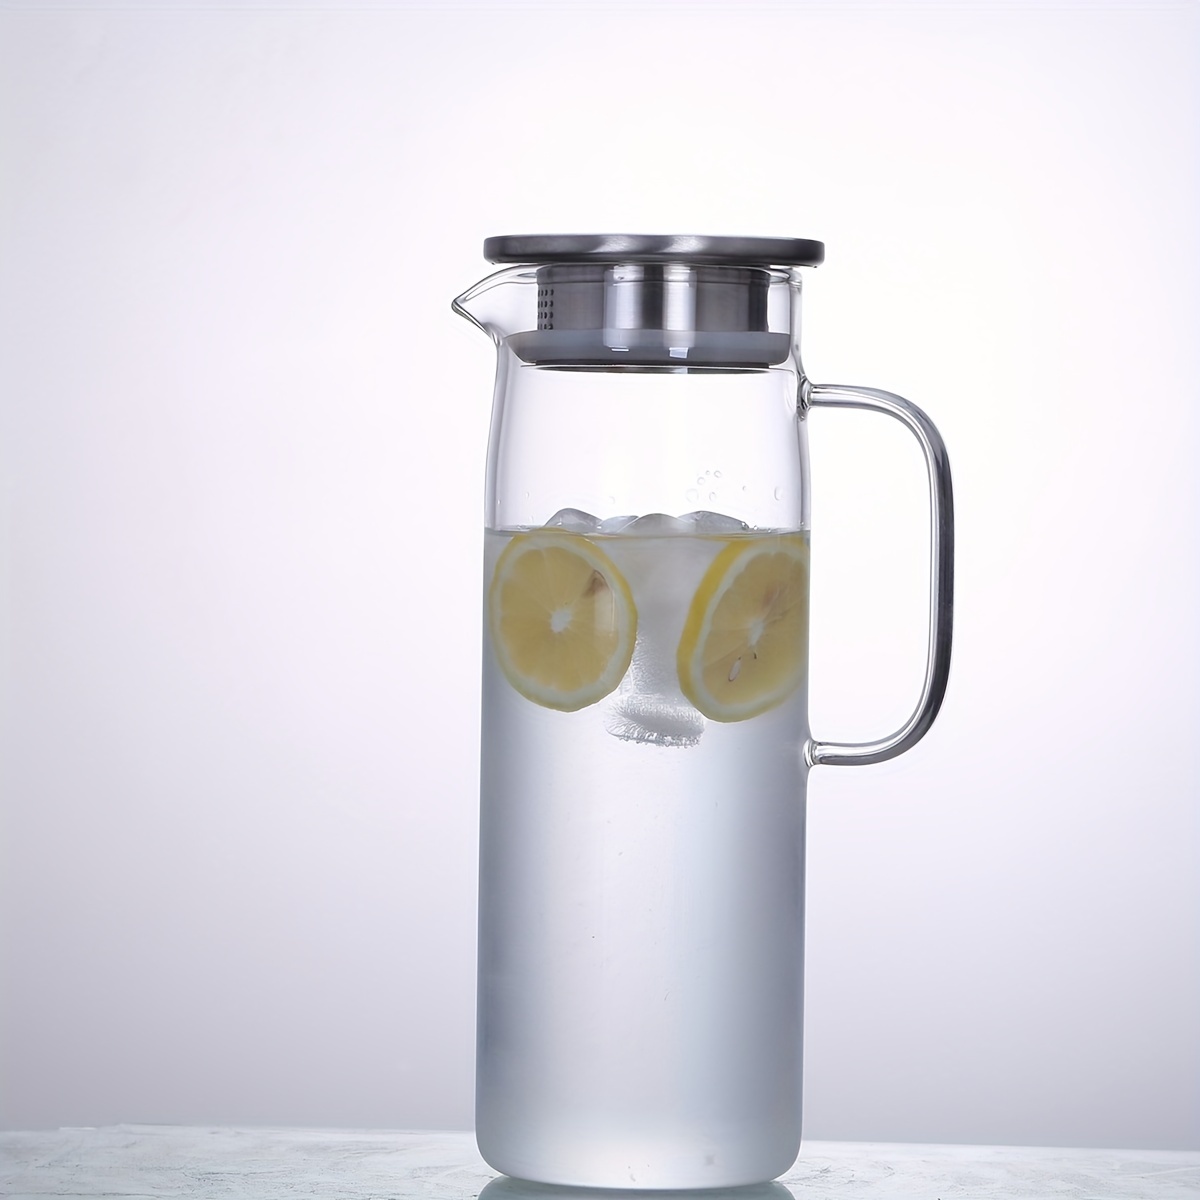 40 Oz Glass Water Pitcher with Lid and Spout for Iced Tea, Coffee